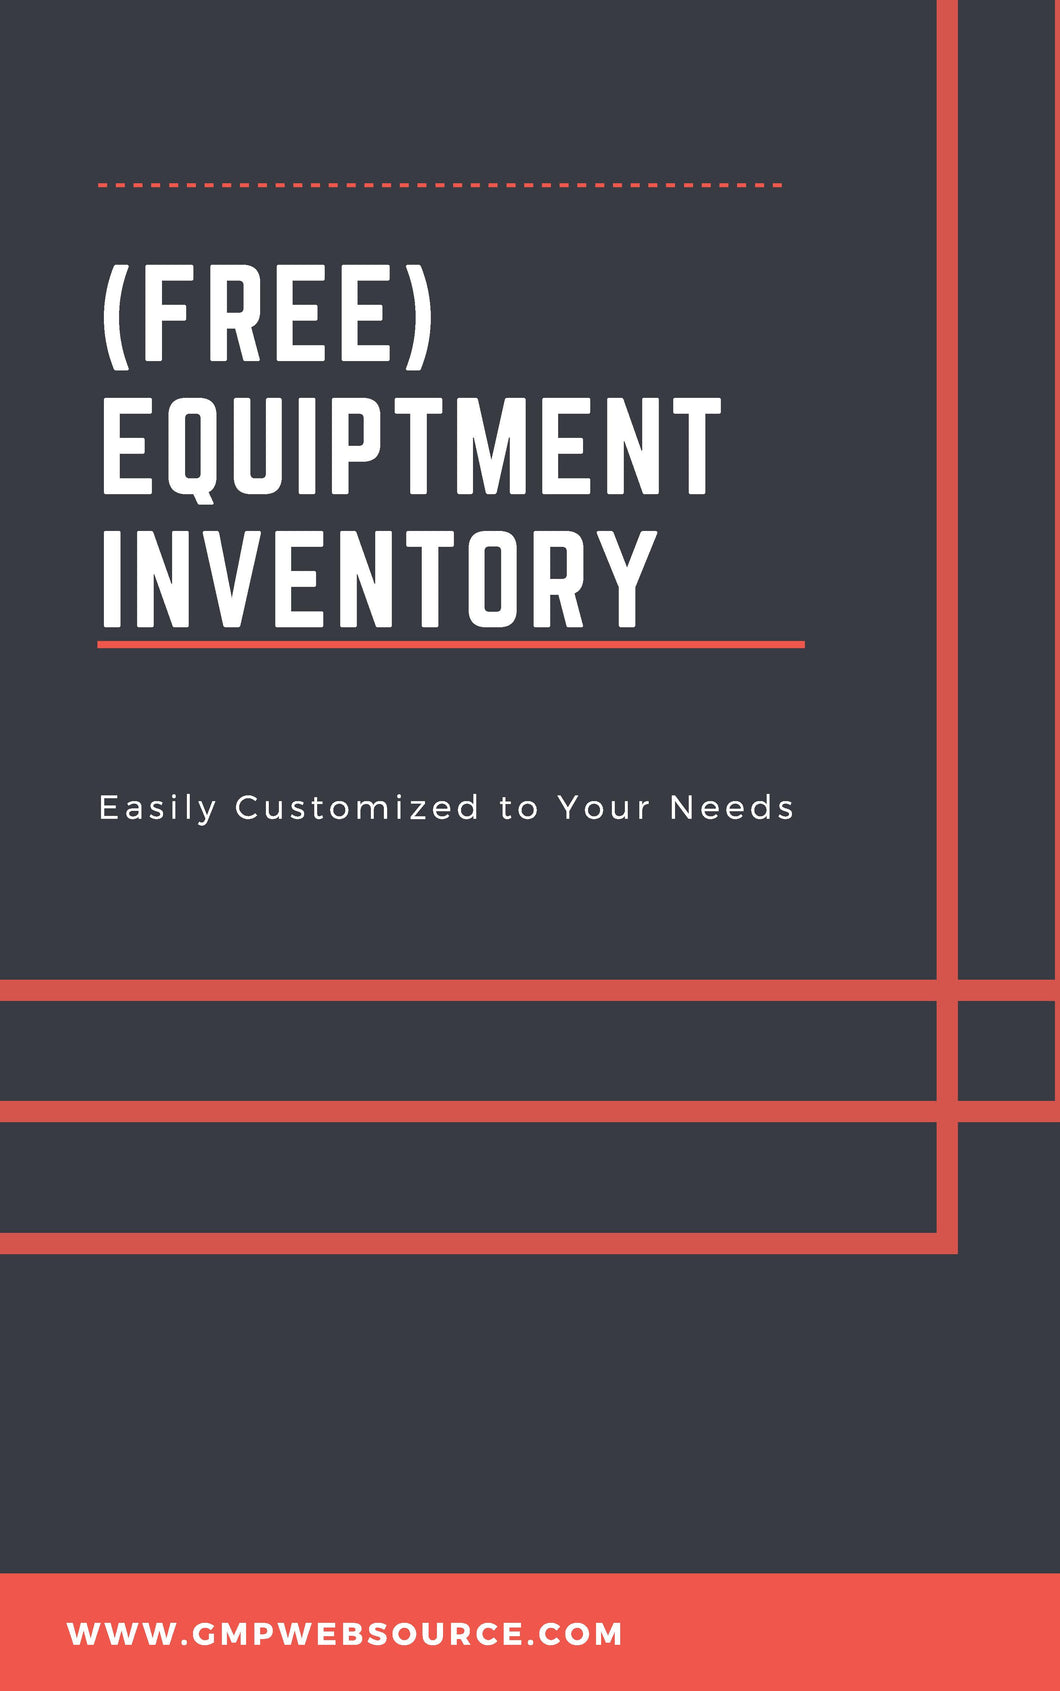 Equipment Inventory Template (Free)